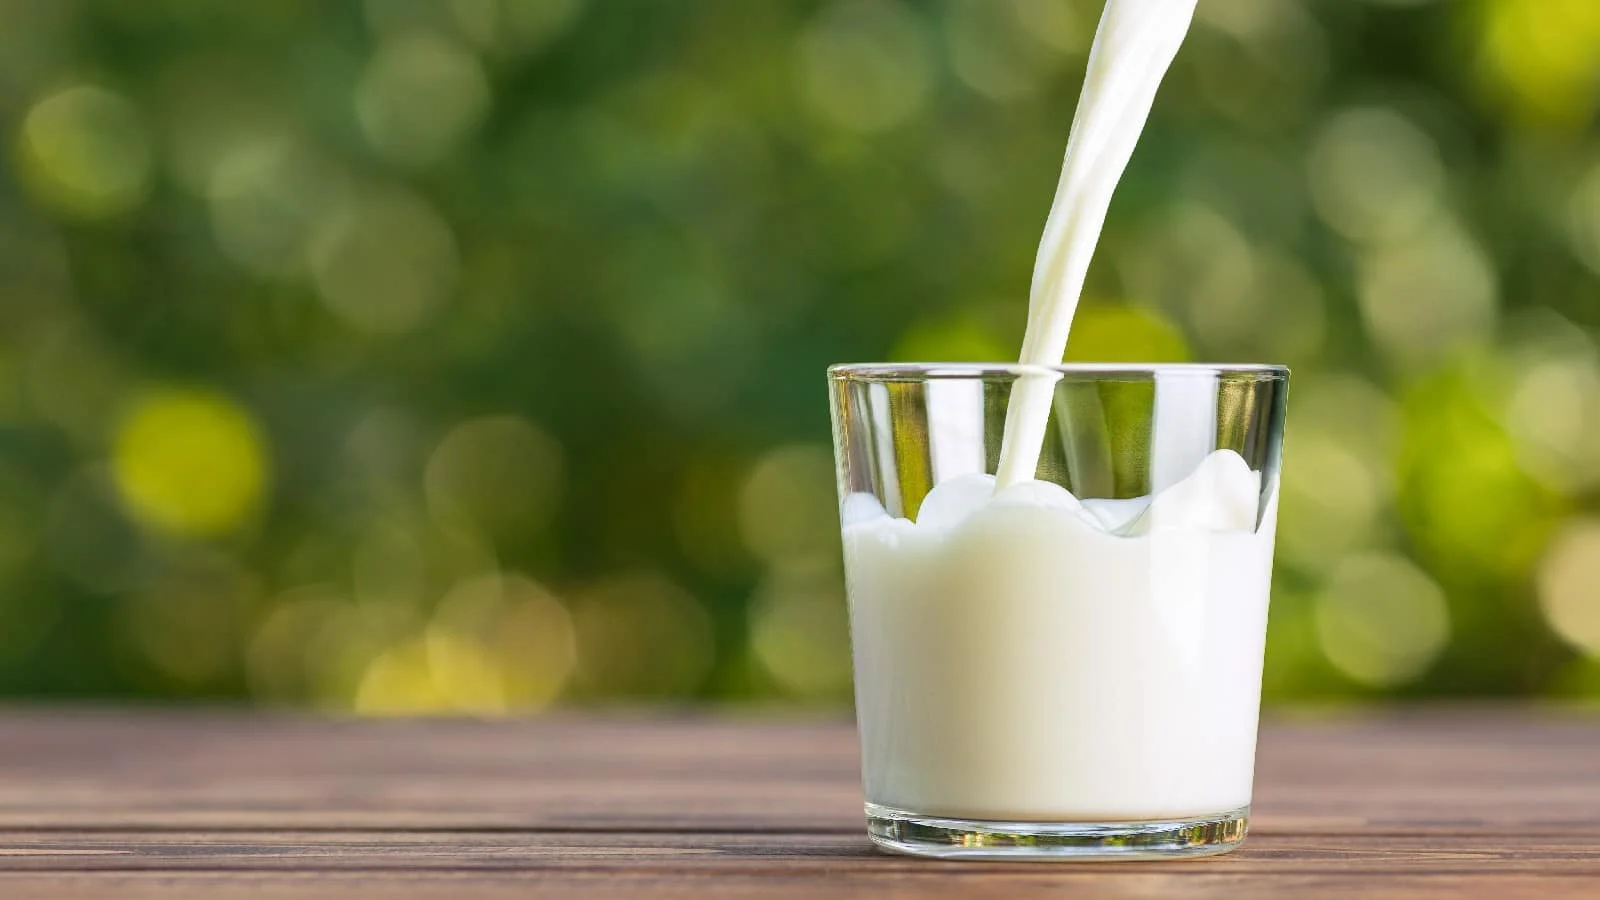 Avoid giving these milk combinations to your kids for their health’s sake